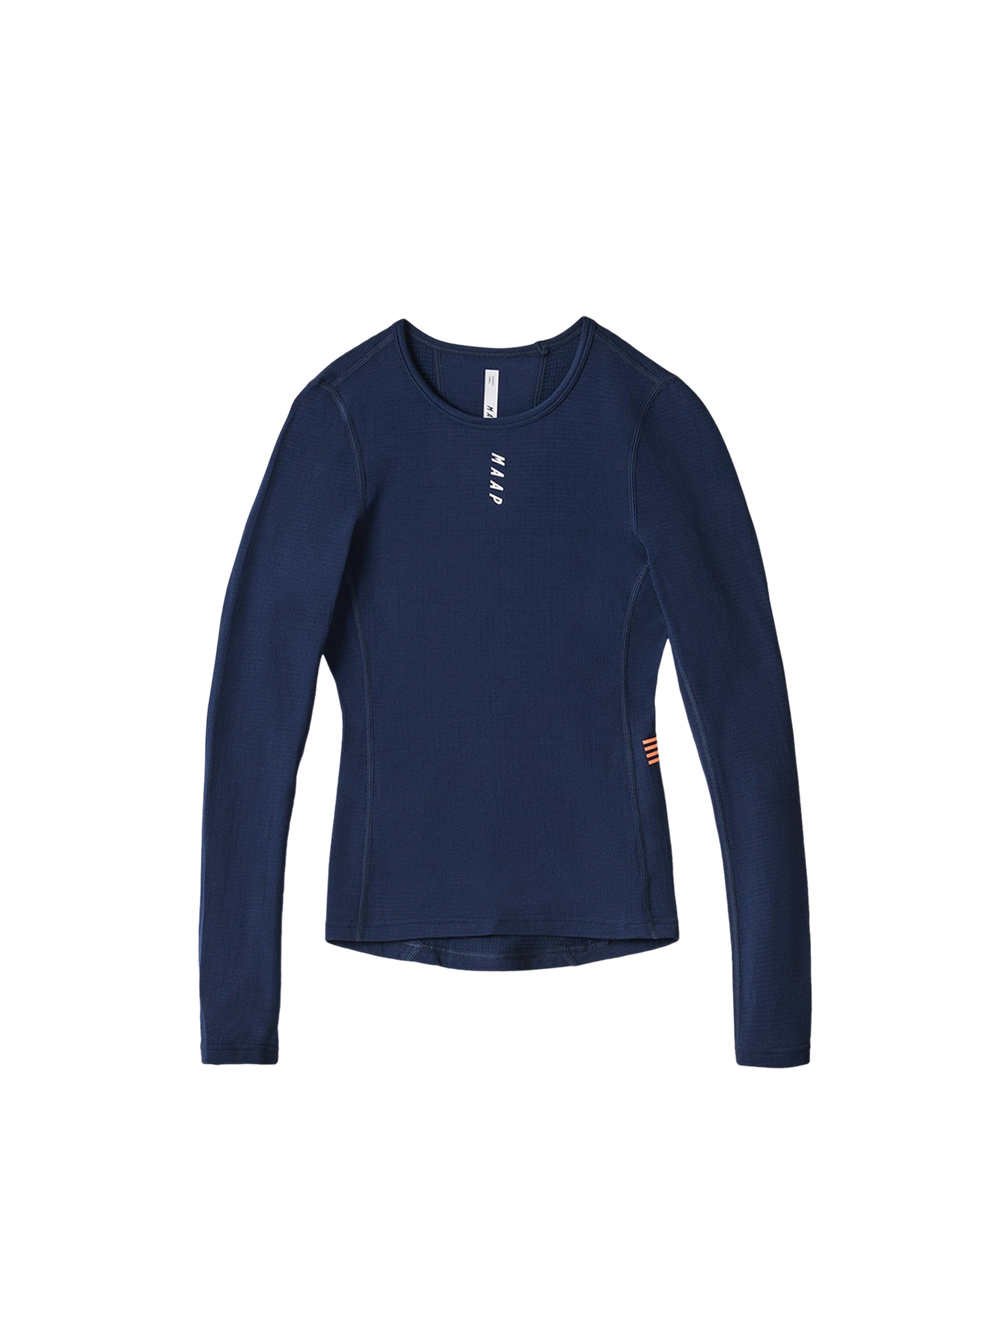 Product Image for Women's Thermal Base Layer LS Tee